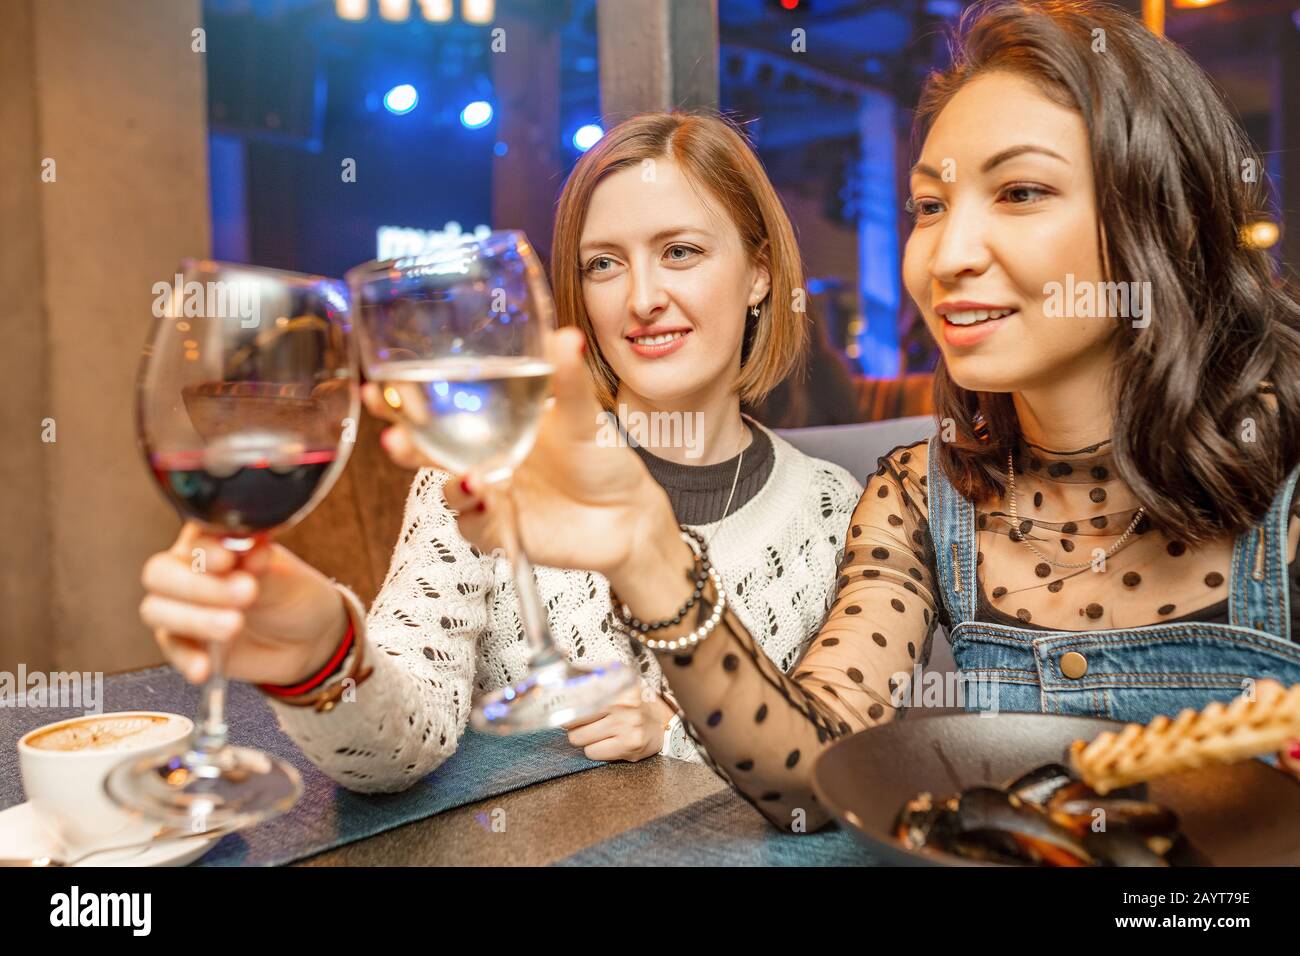 Two girl friends have fun and chat while drinking a glass of wine in a ...